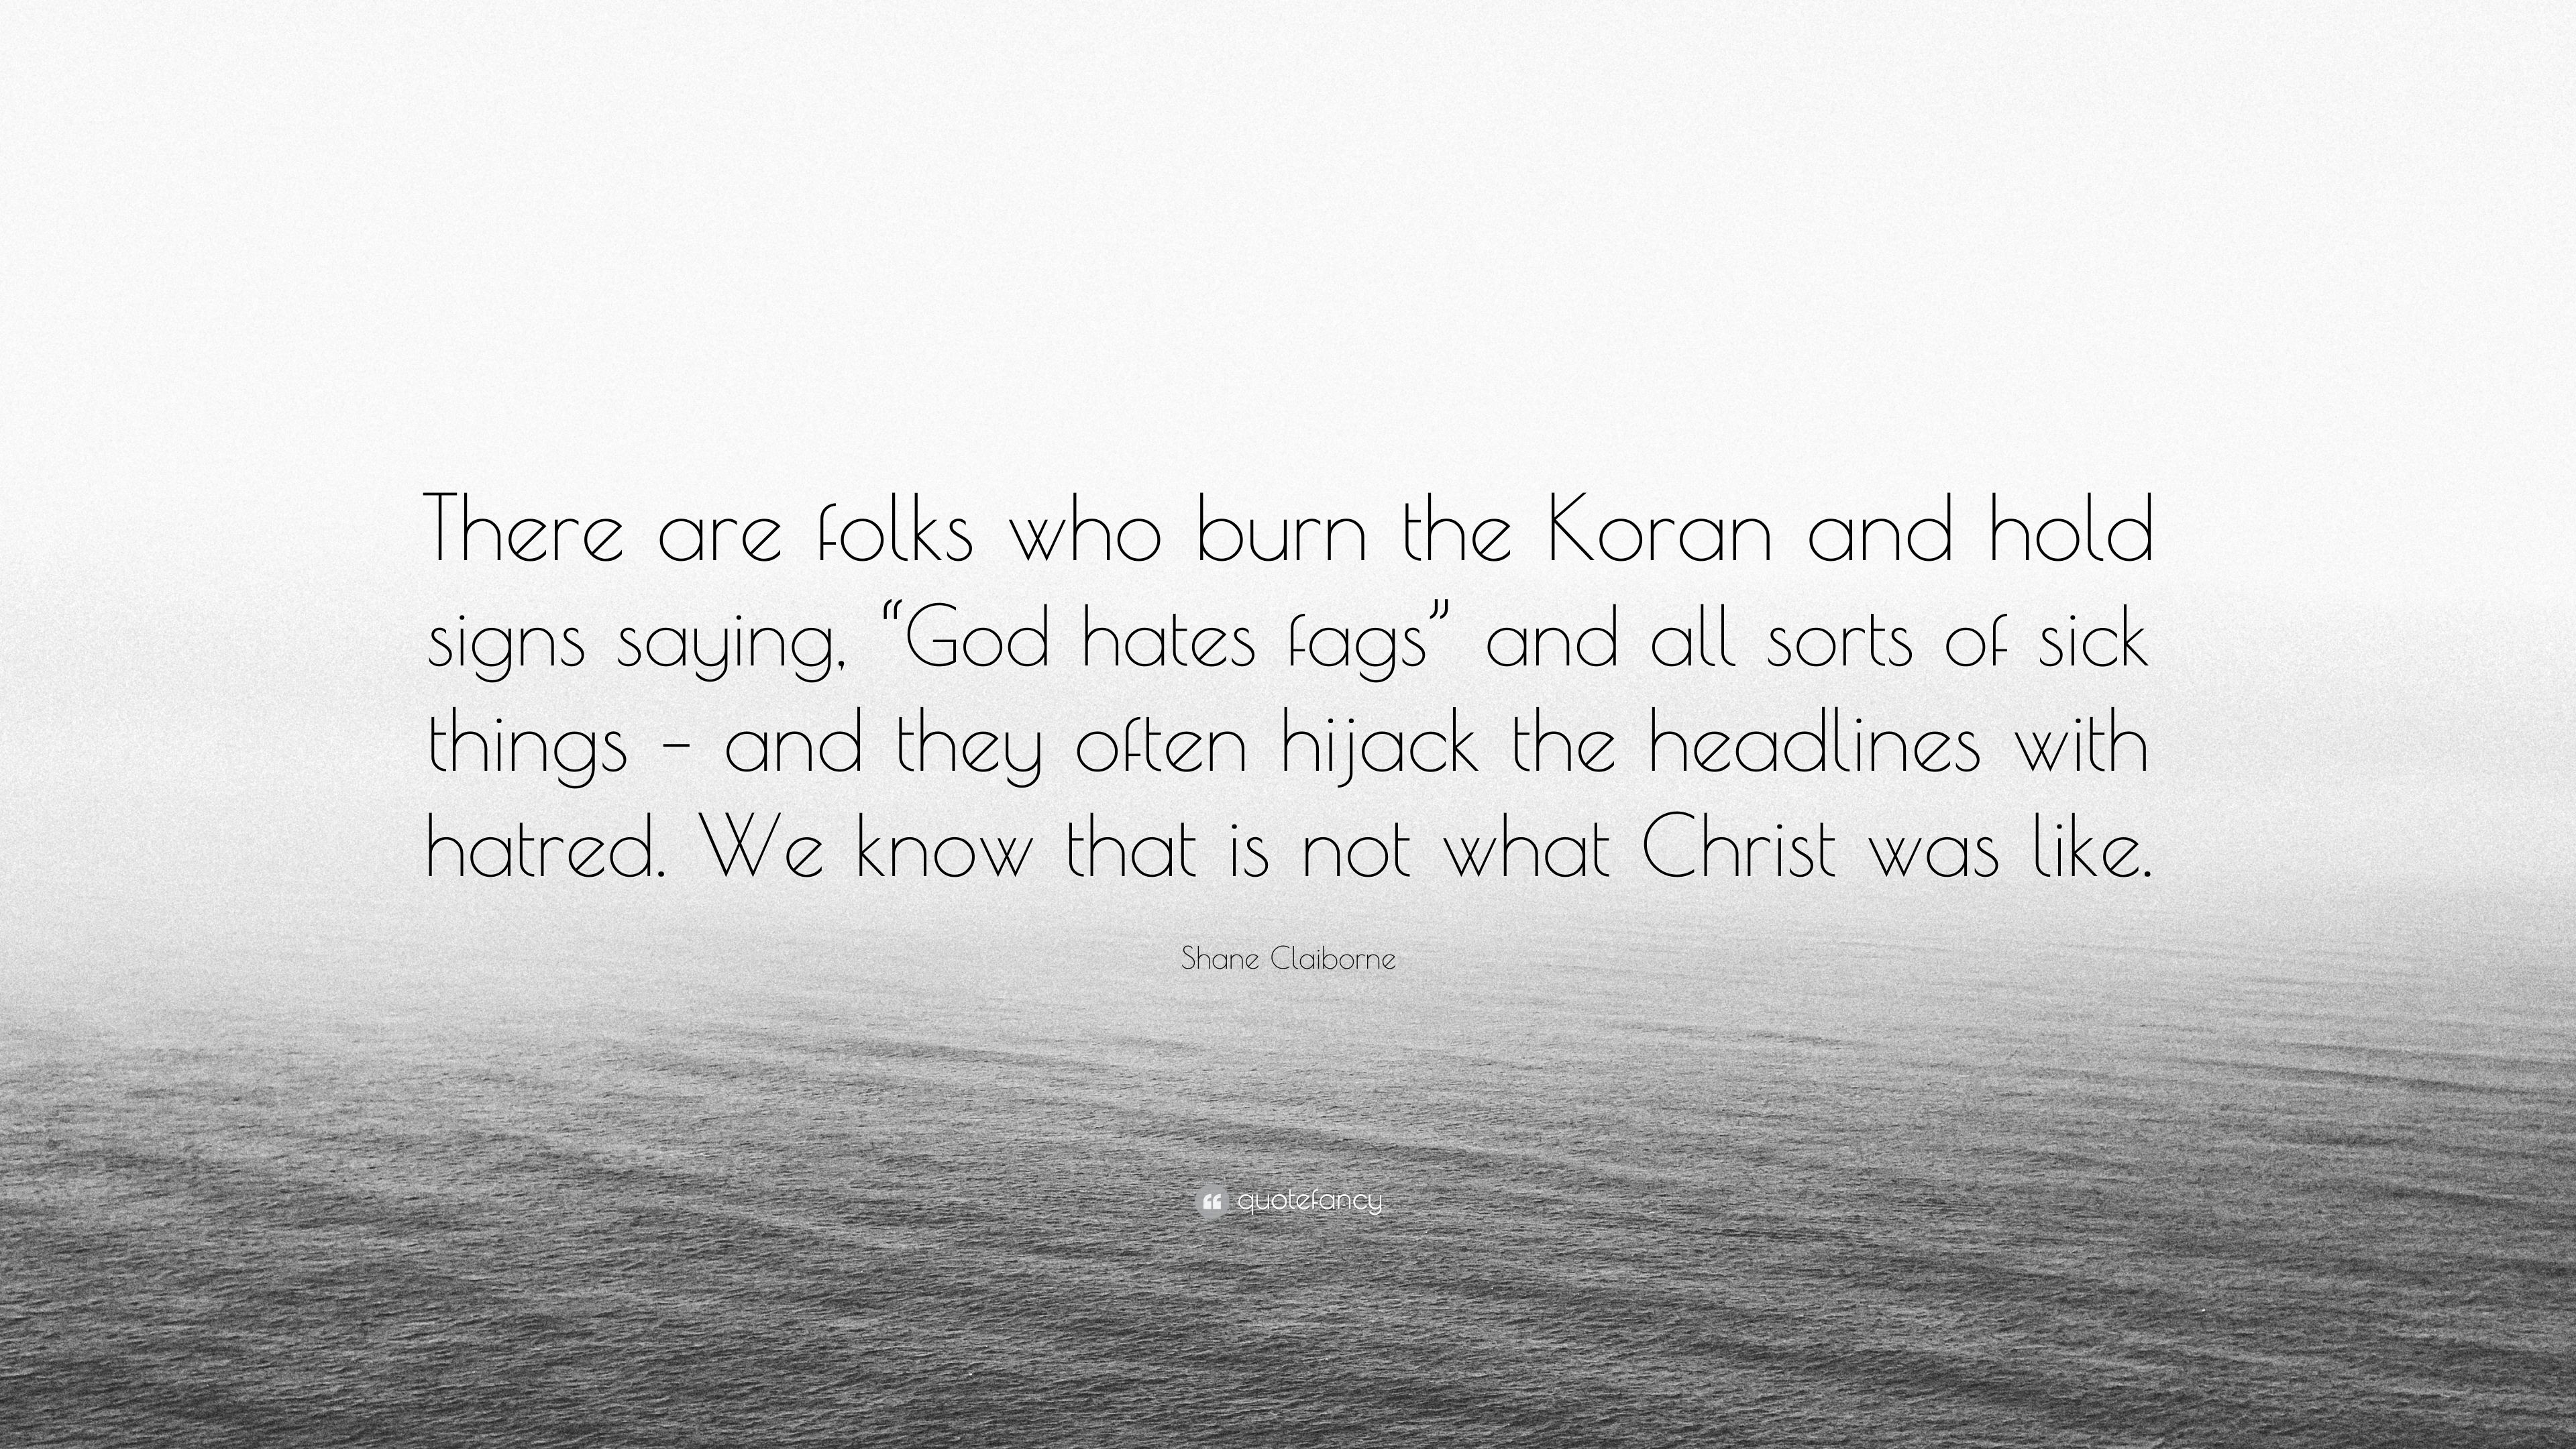 3840x2160 Shane Claiborne Quote: “There are folks who burn the Koran and hold signs  saying